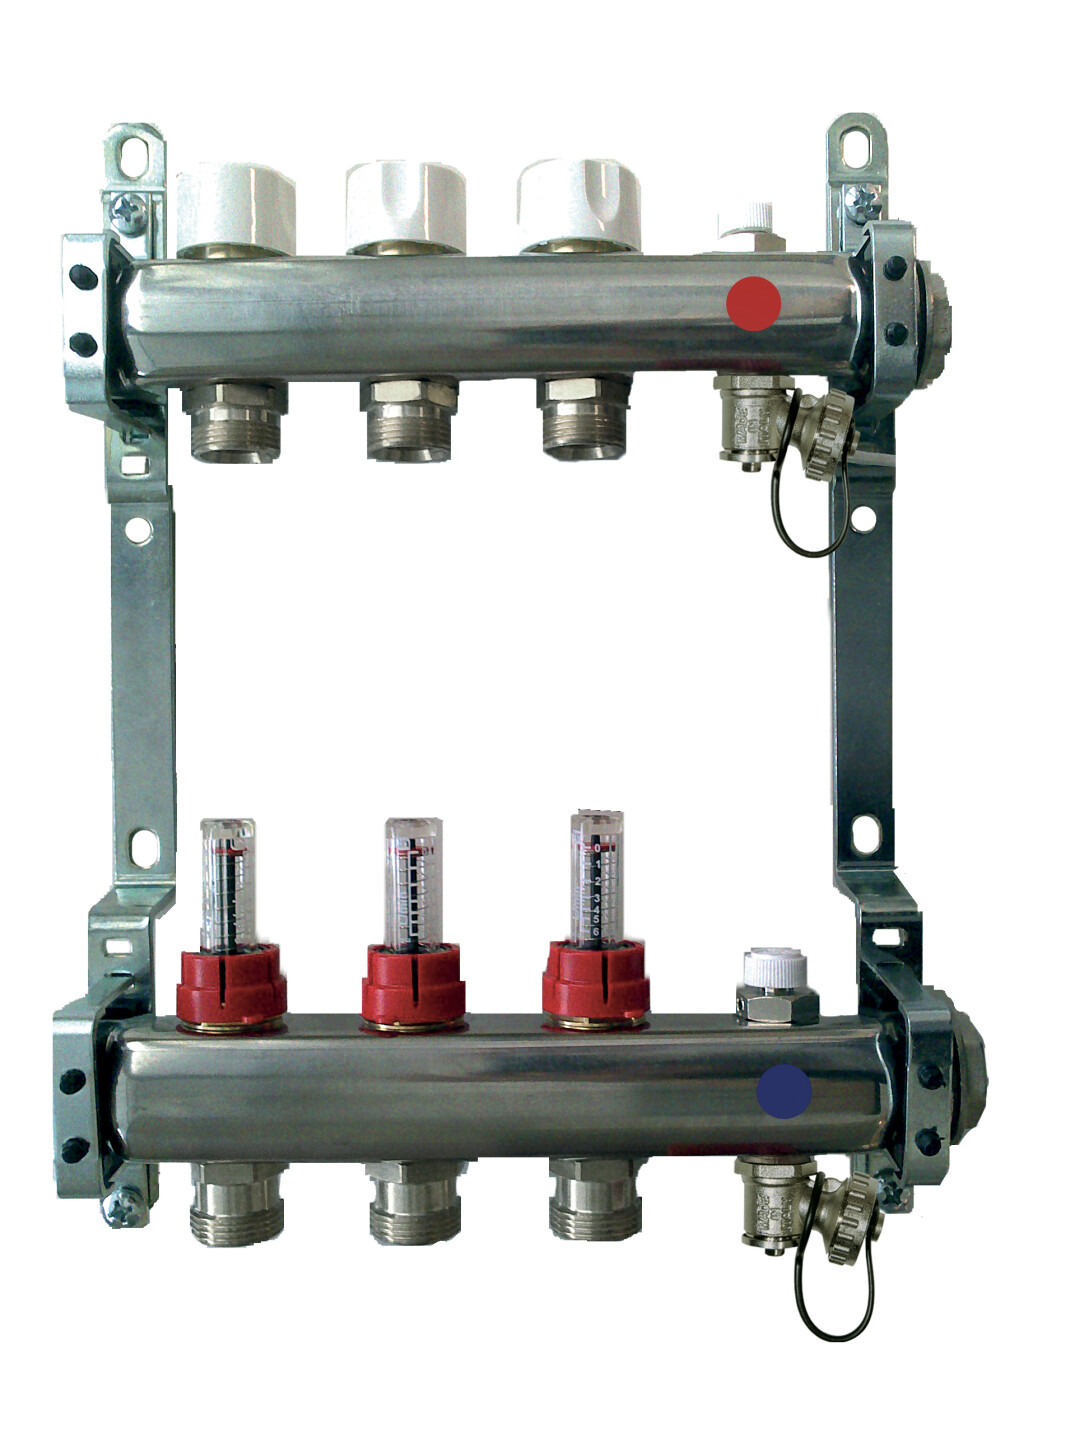 FF manifolds therm. valves and flowmeters, man. Discharge